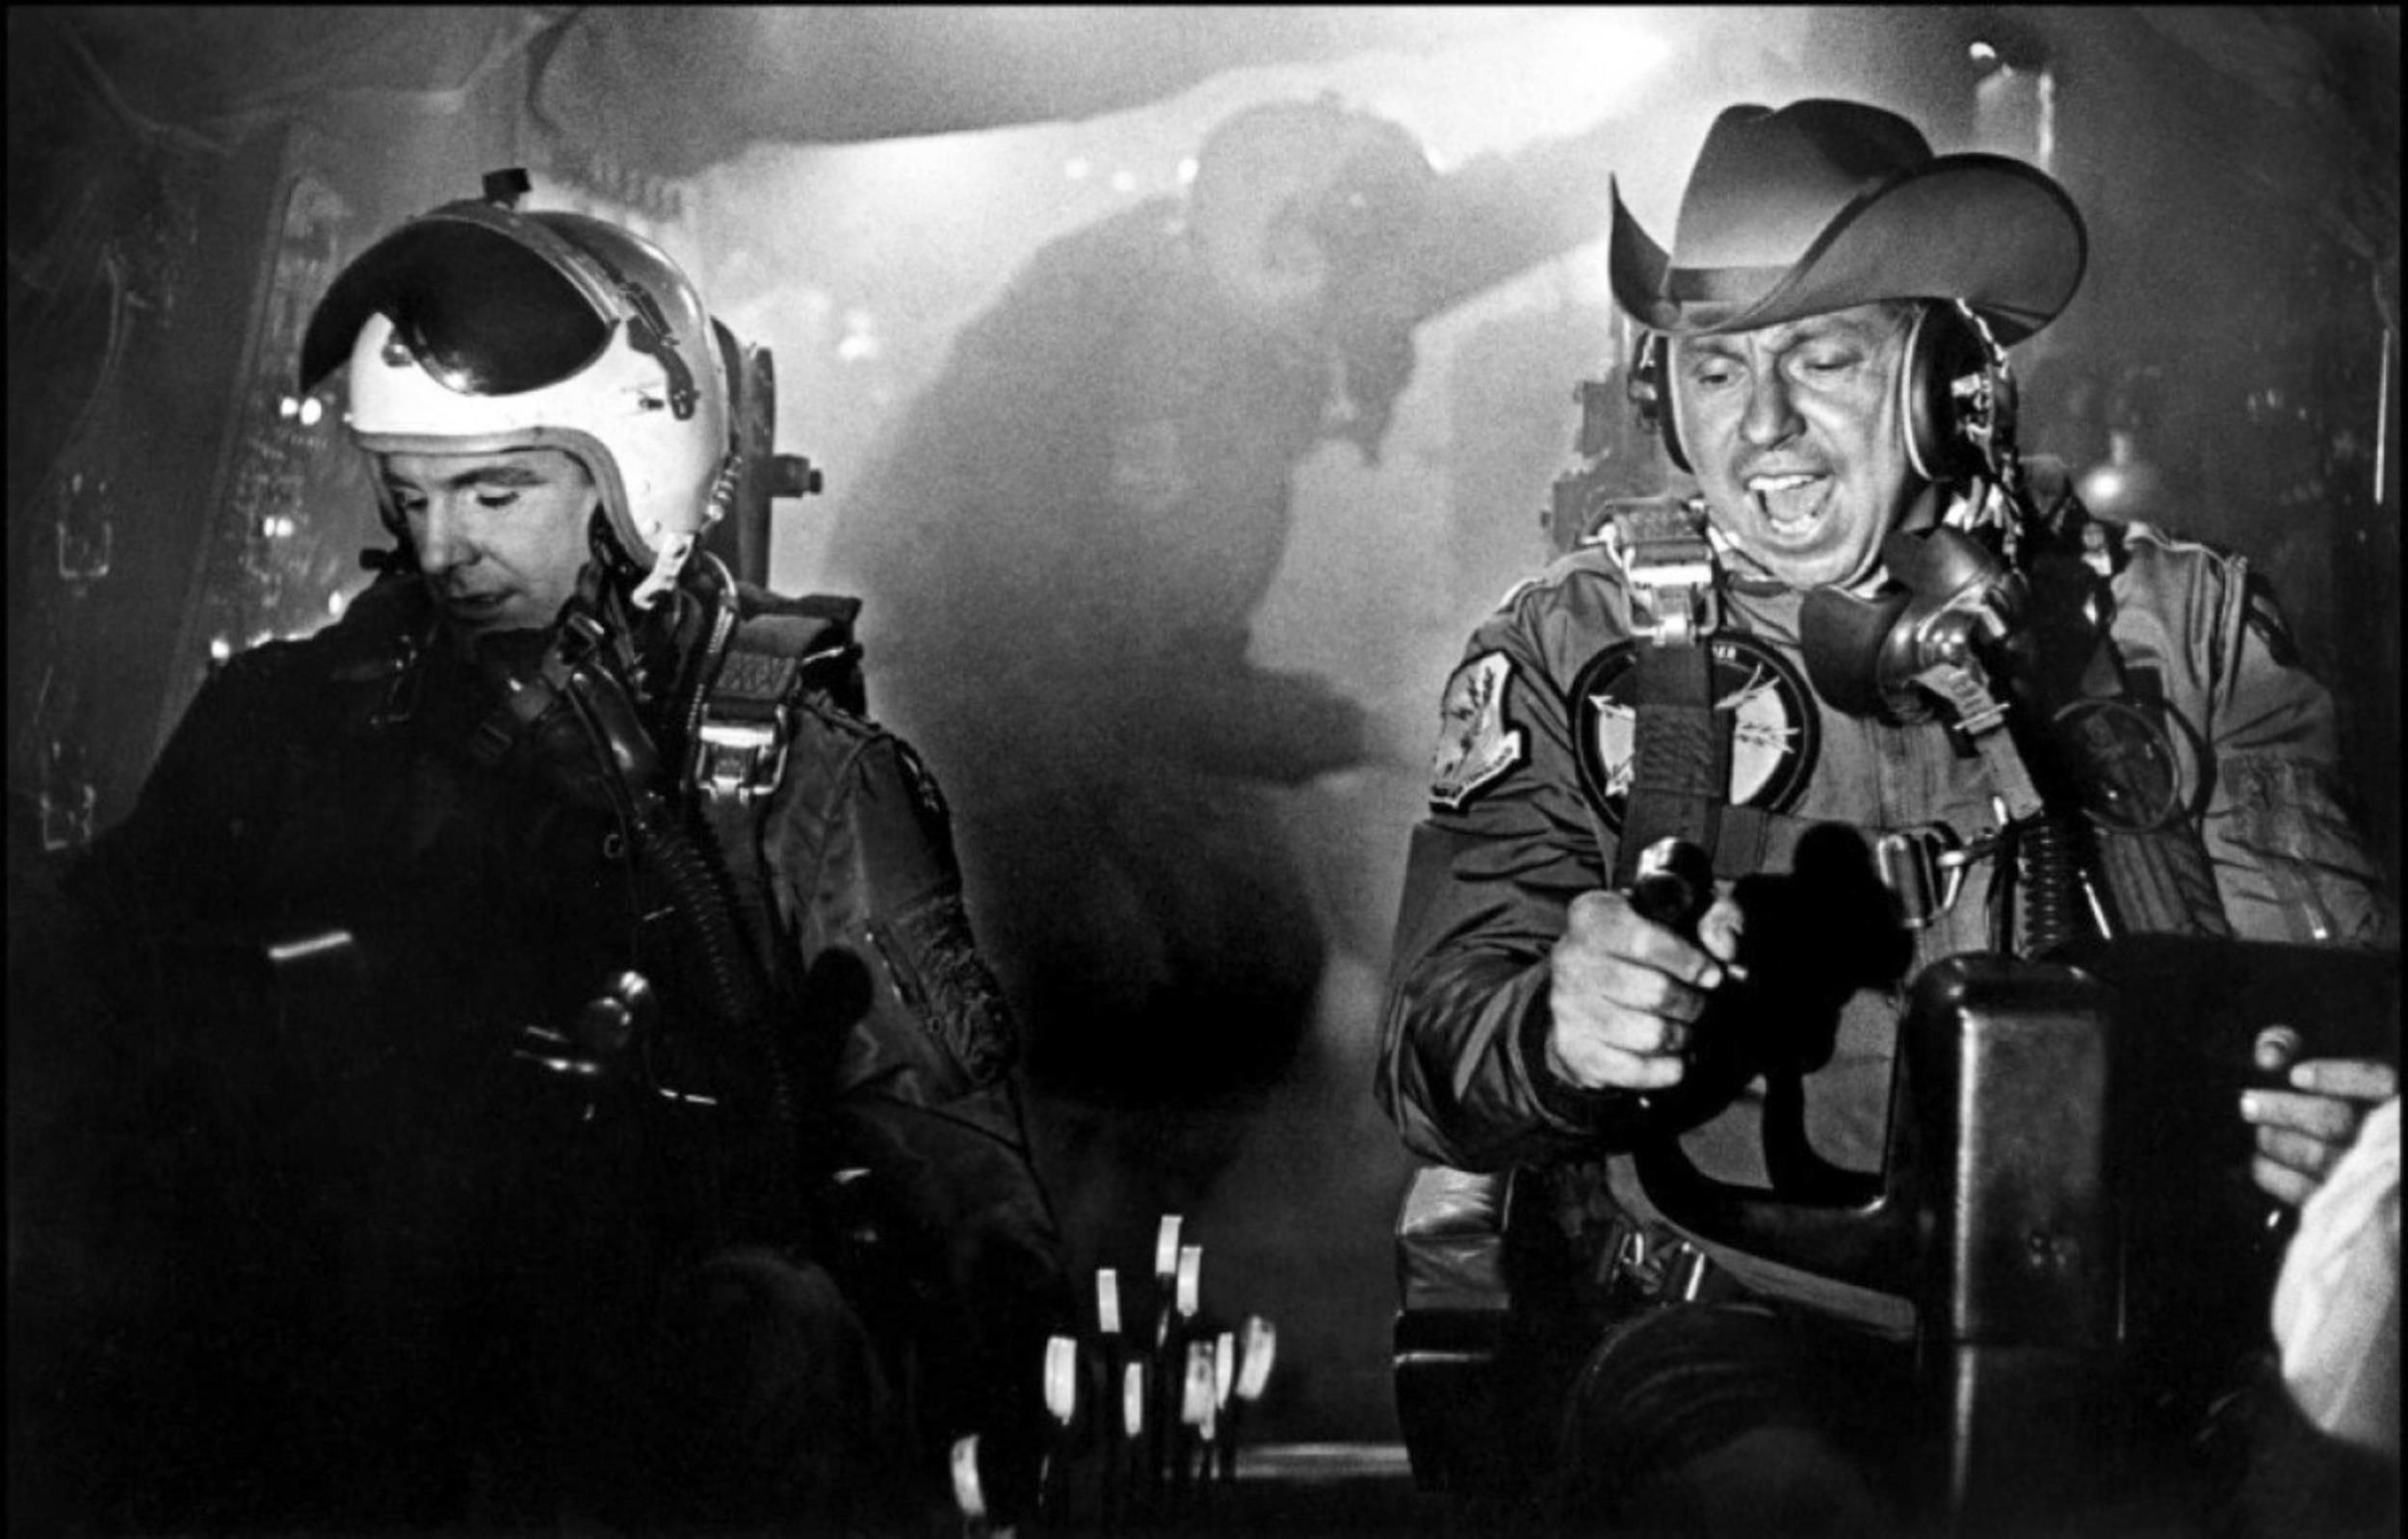 <p>There are a few distinct segments of “Dr. Strangelove,” Stanley Kubrick’s indelible war satire. While Peter Sellers is not in the plane portion, it is still quite memorable. Slim Pickens plays Major “King” Kong, who has received an inaccurate message that leads him on a mission to bomb the Soviet Union, which would trigger a civilization-destroying war. Cue Pickens riding a nuke like it’s a bucking bronco.</p><p><a href='https://www.msn.com/en-us/community/channel/vid-cj9pqbr0vn9in2b6ddcd8sfgpfq6x6utp44fssrv6mc2gtybw0us'>Follow us on MSN to see more of our exclusive entertainment content.</a></p>